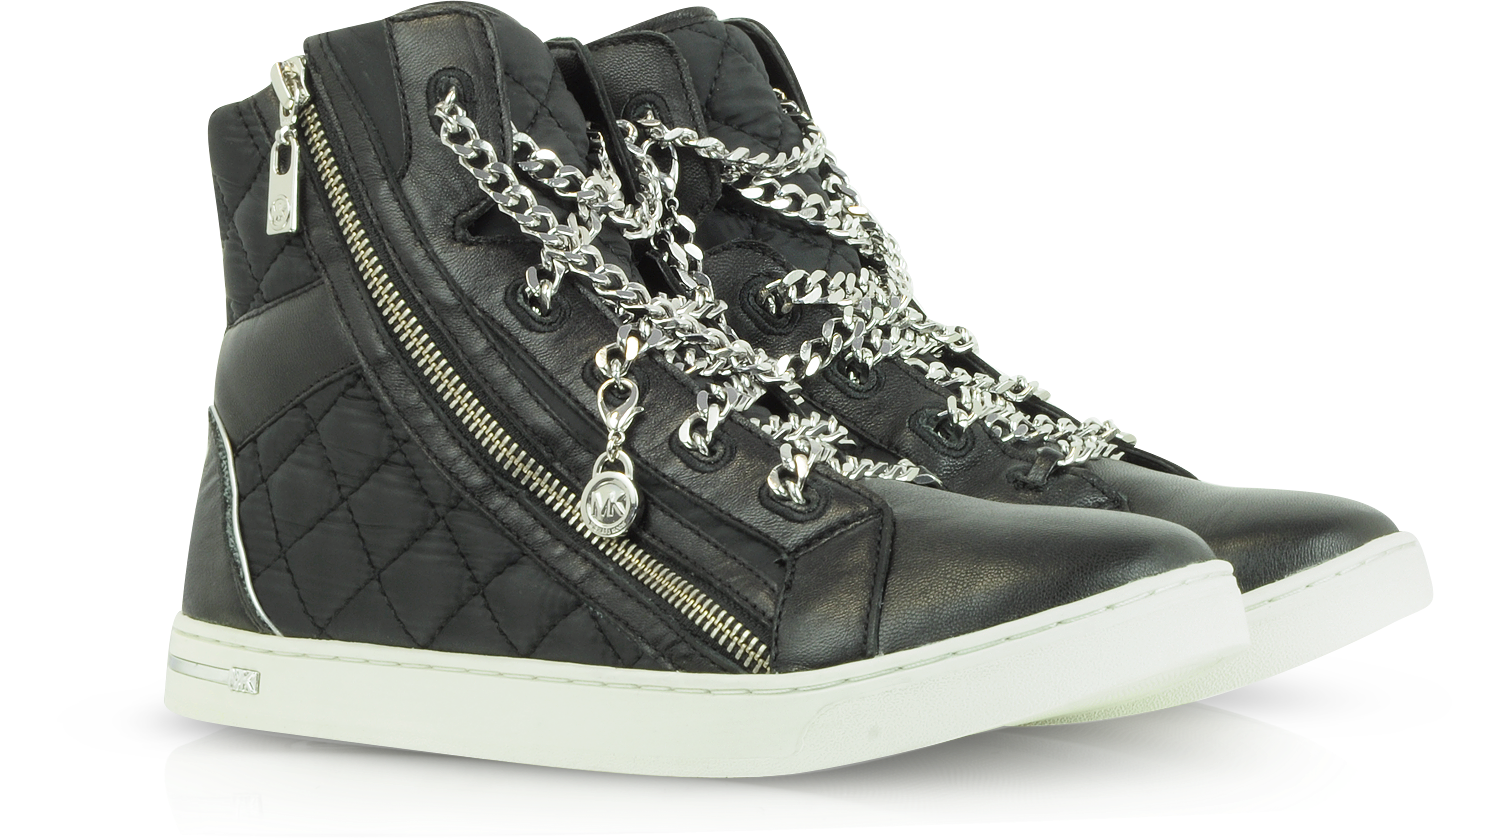 Michael Kors Urban Chain High Top Quilted Nylon Sneaker 6M US at FORZIERI